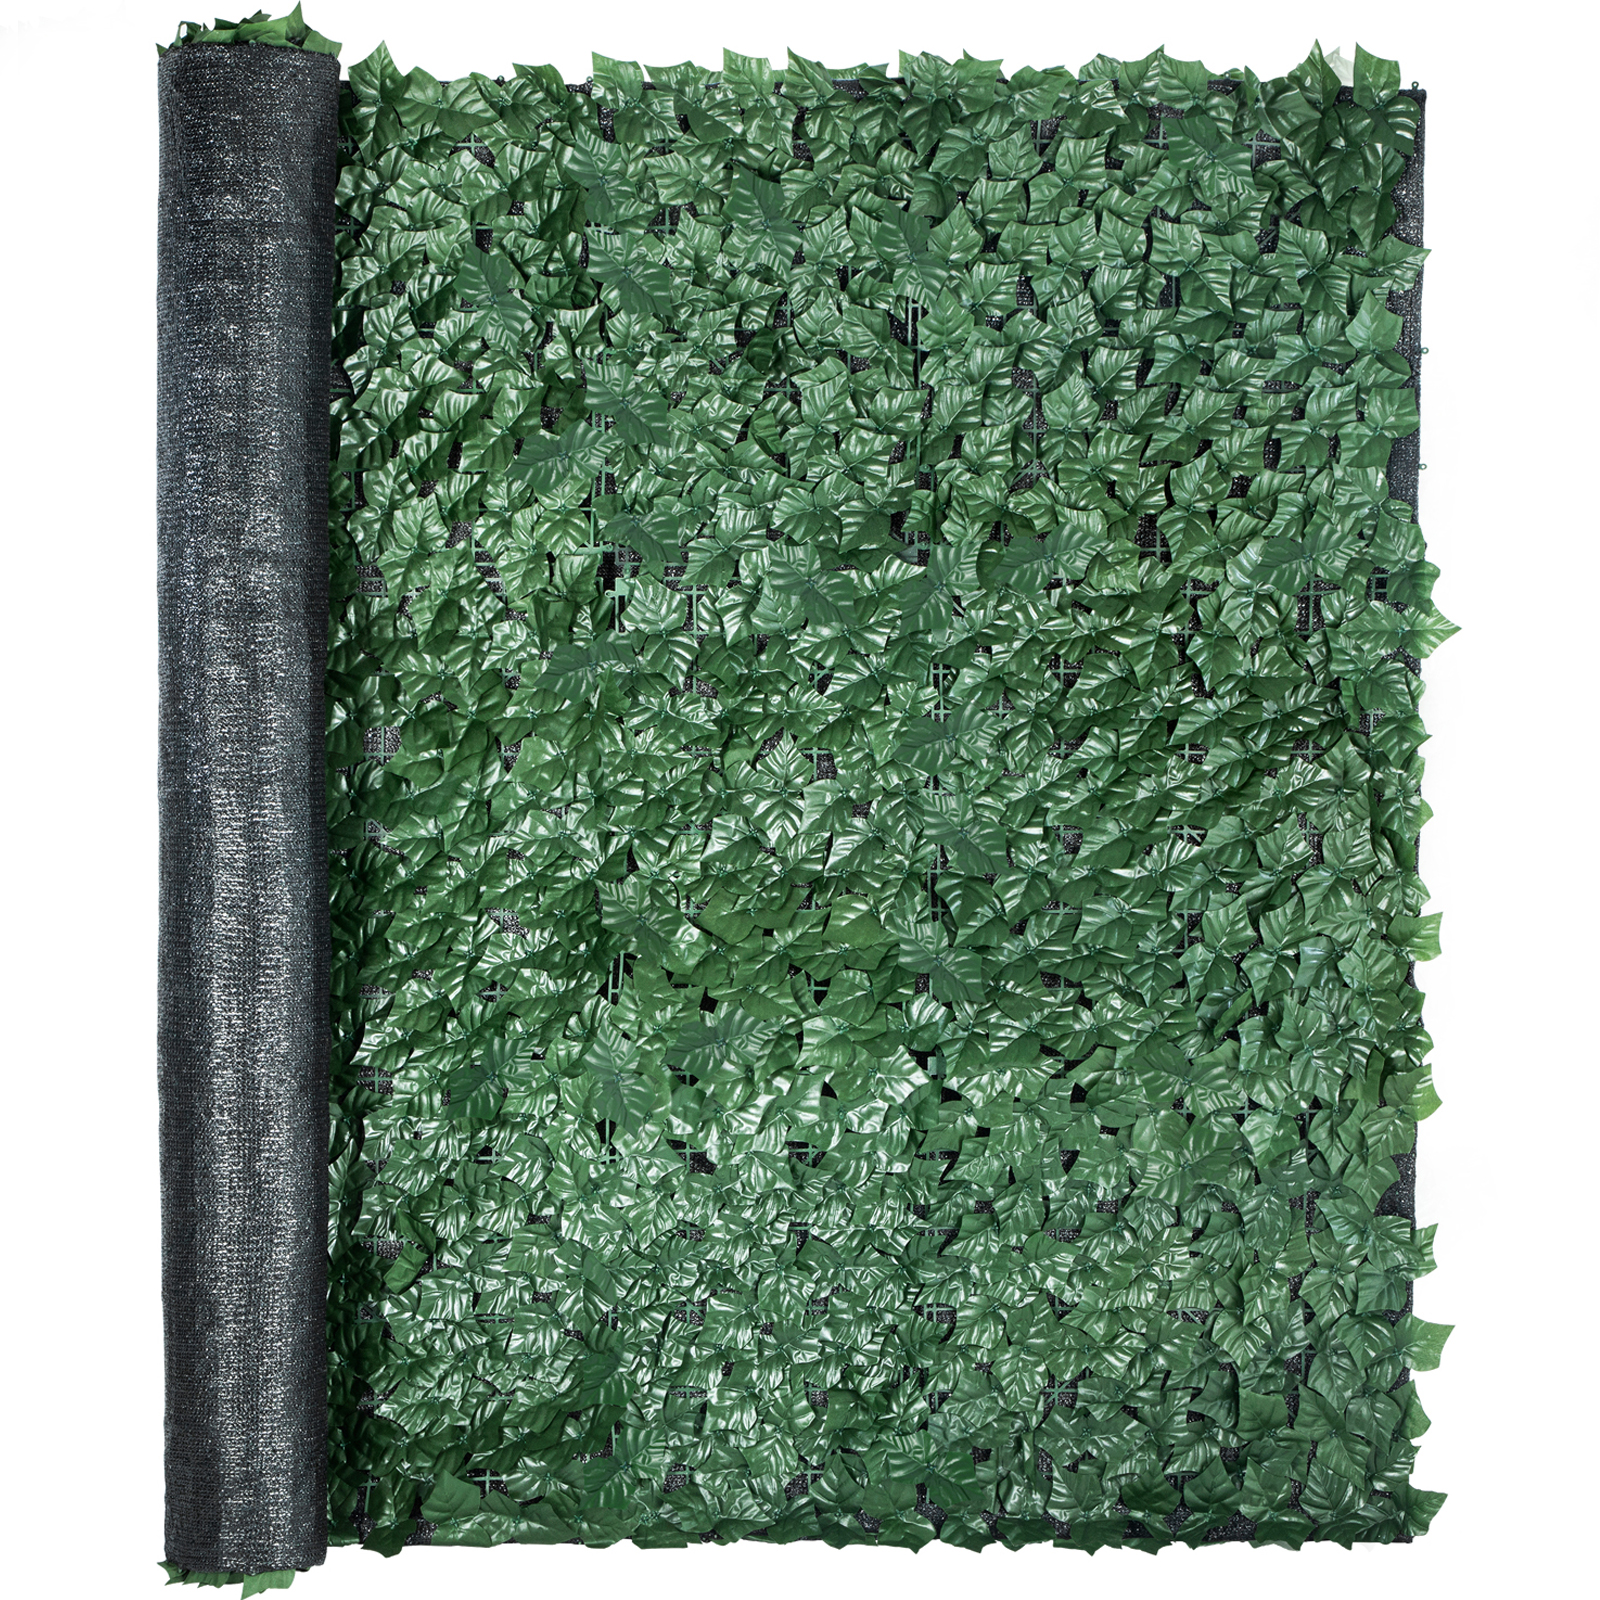 VEVOR 59"x98" Faux Ivy Leaf Artificial Hedge Privacy Fence Screen Decorative от Vevor Many GEOs